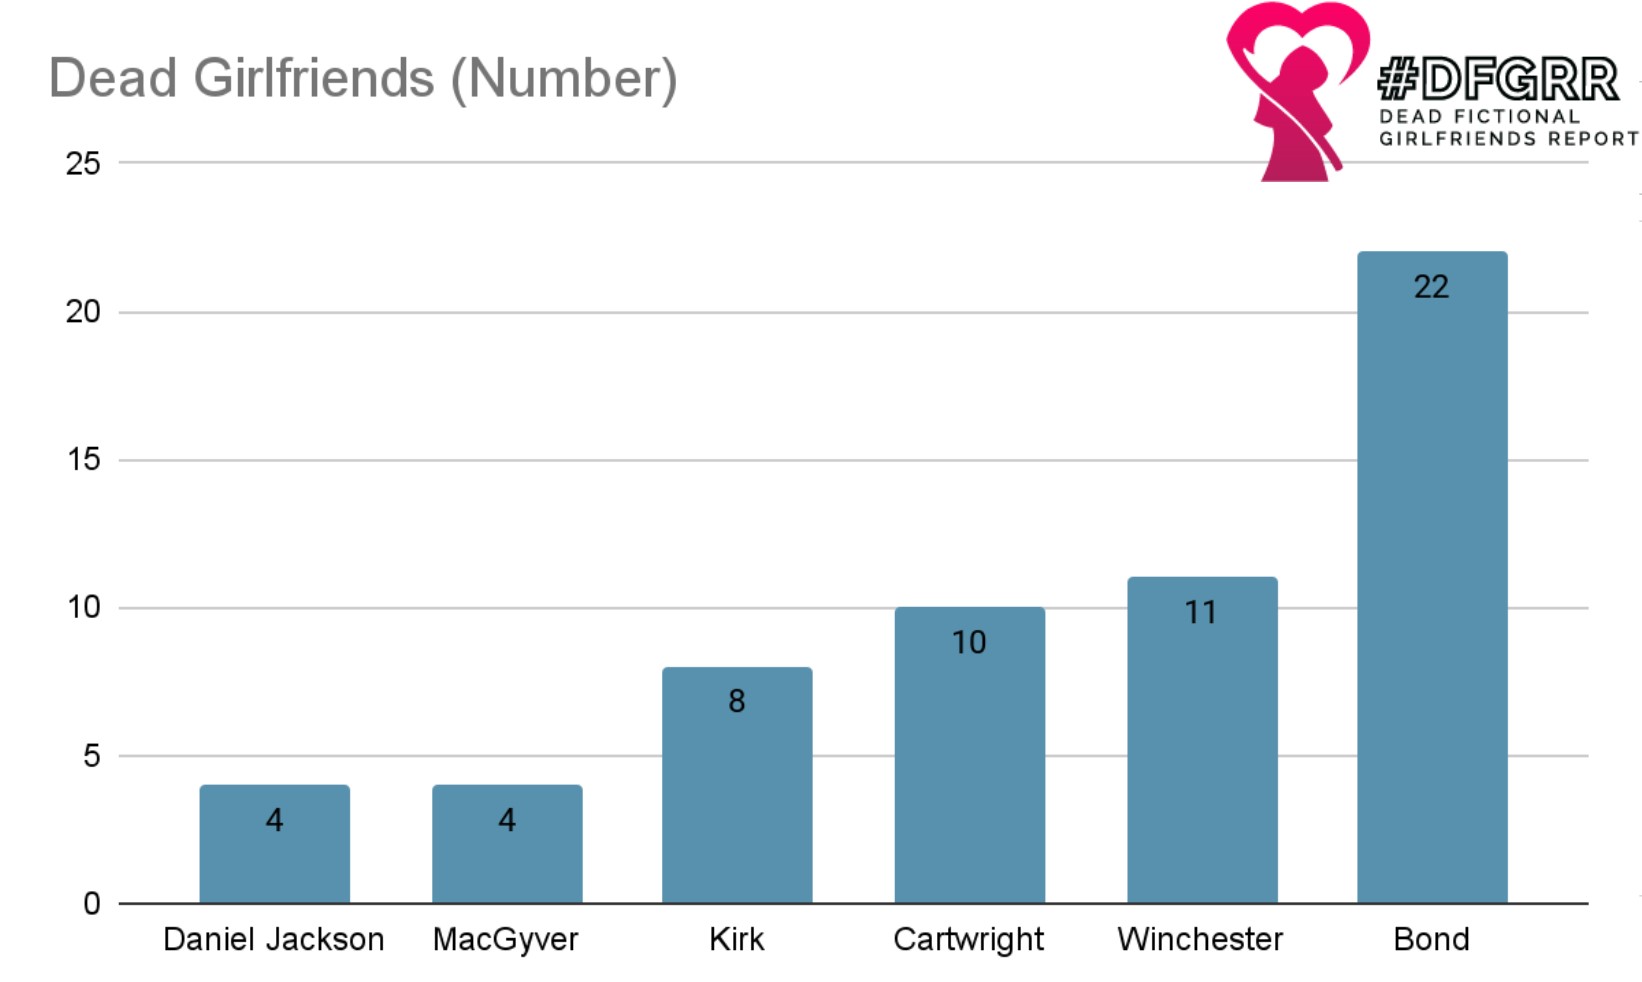 Bar chart labeled "Dead Girlfriends (Number)". It shows Jackson and MacGyver have 4, Kirk had 8, Cartwright has 10, Winchester 11, and Bond 22.